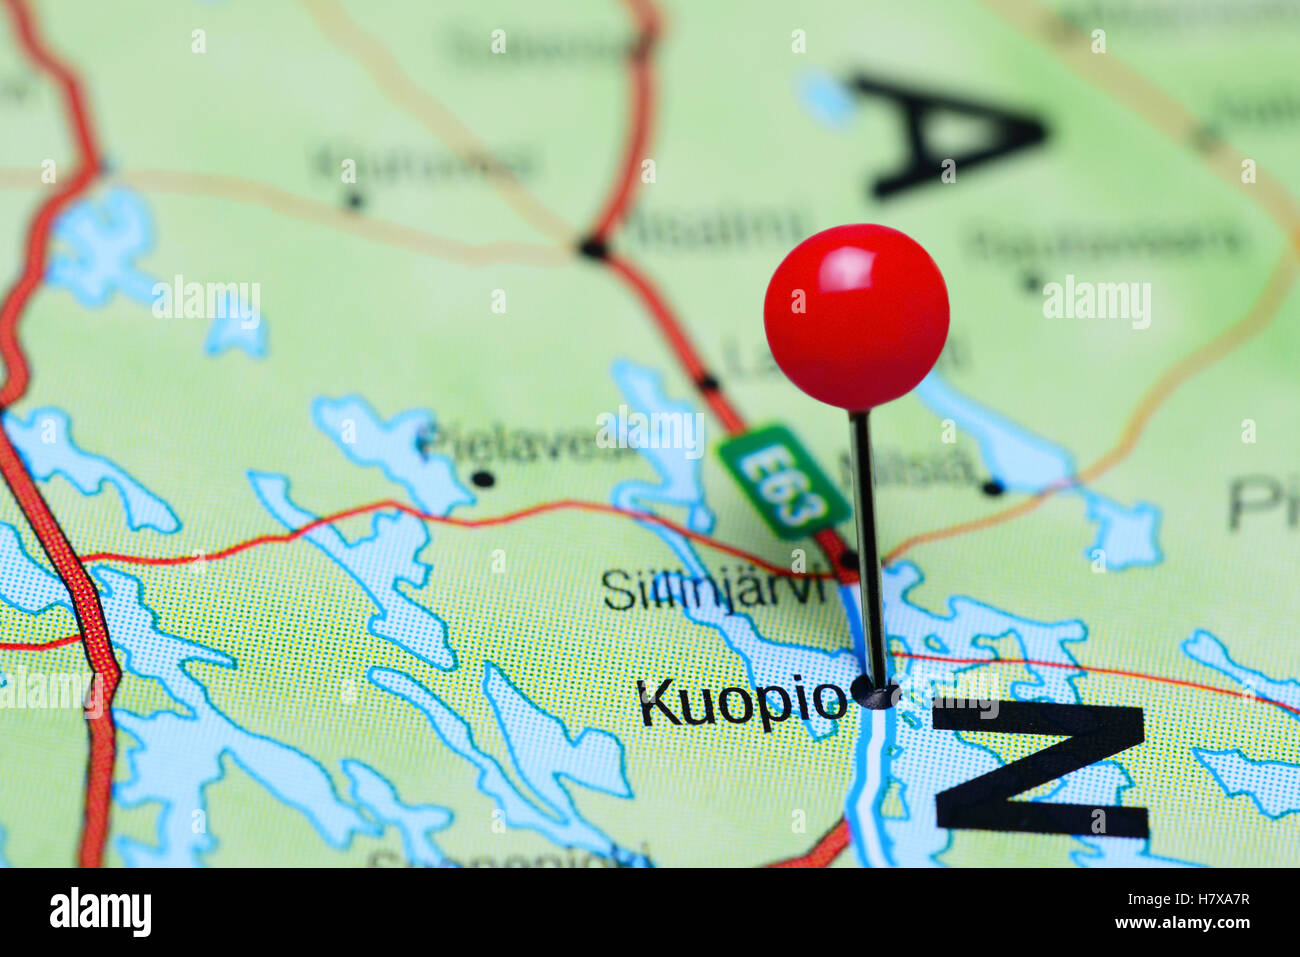 Kuopio pinned on a map of Finland Stock Photo